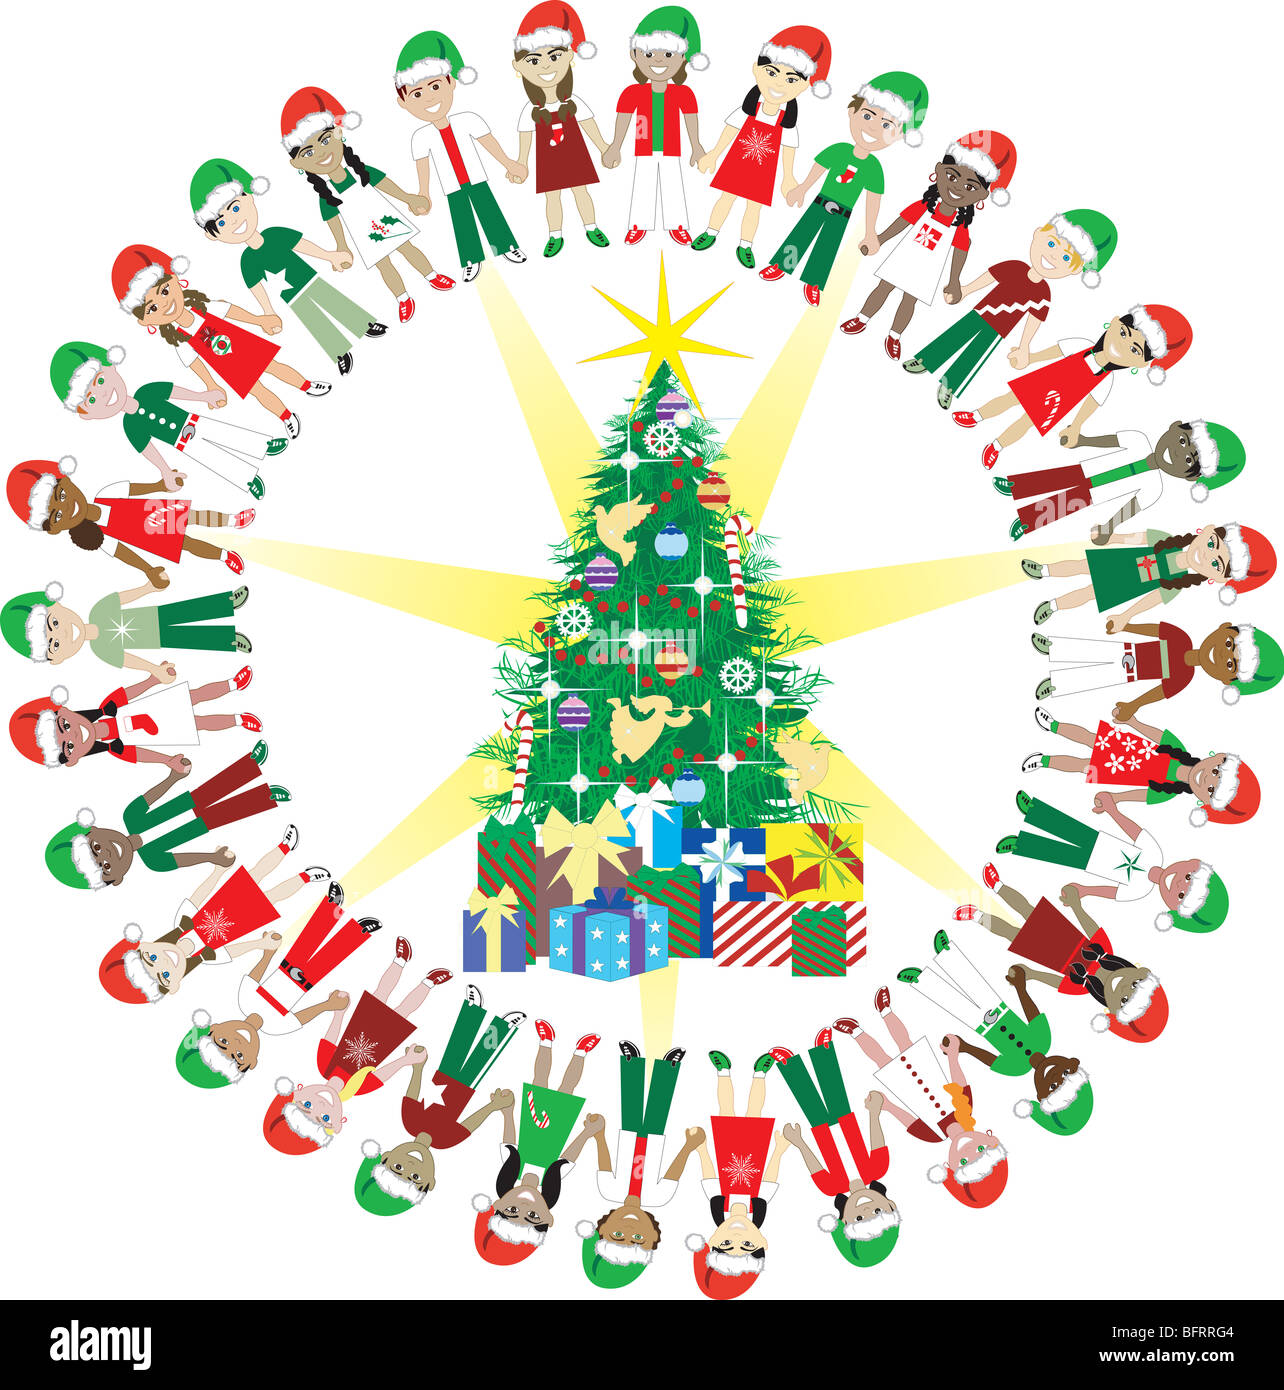 Kids Love Christmas World 2. 32 Different Children representing different countries around the Christmas Tree. Stock Photo